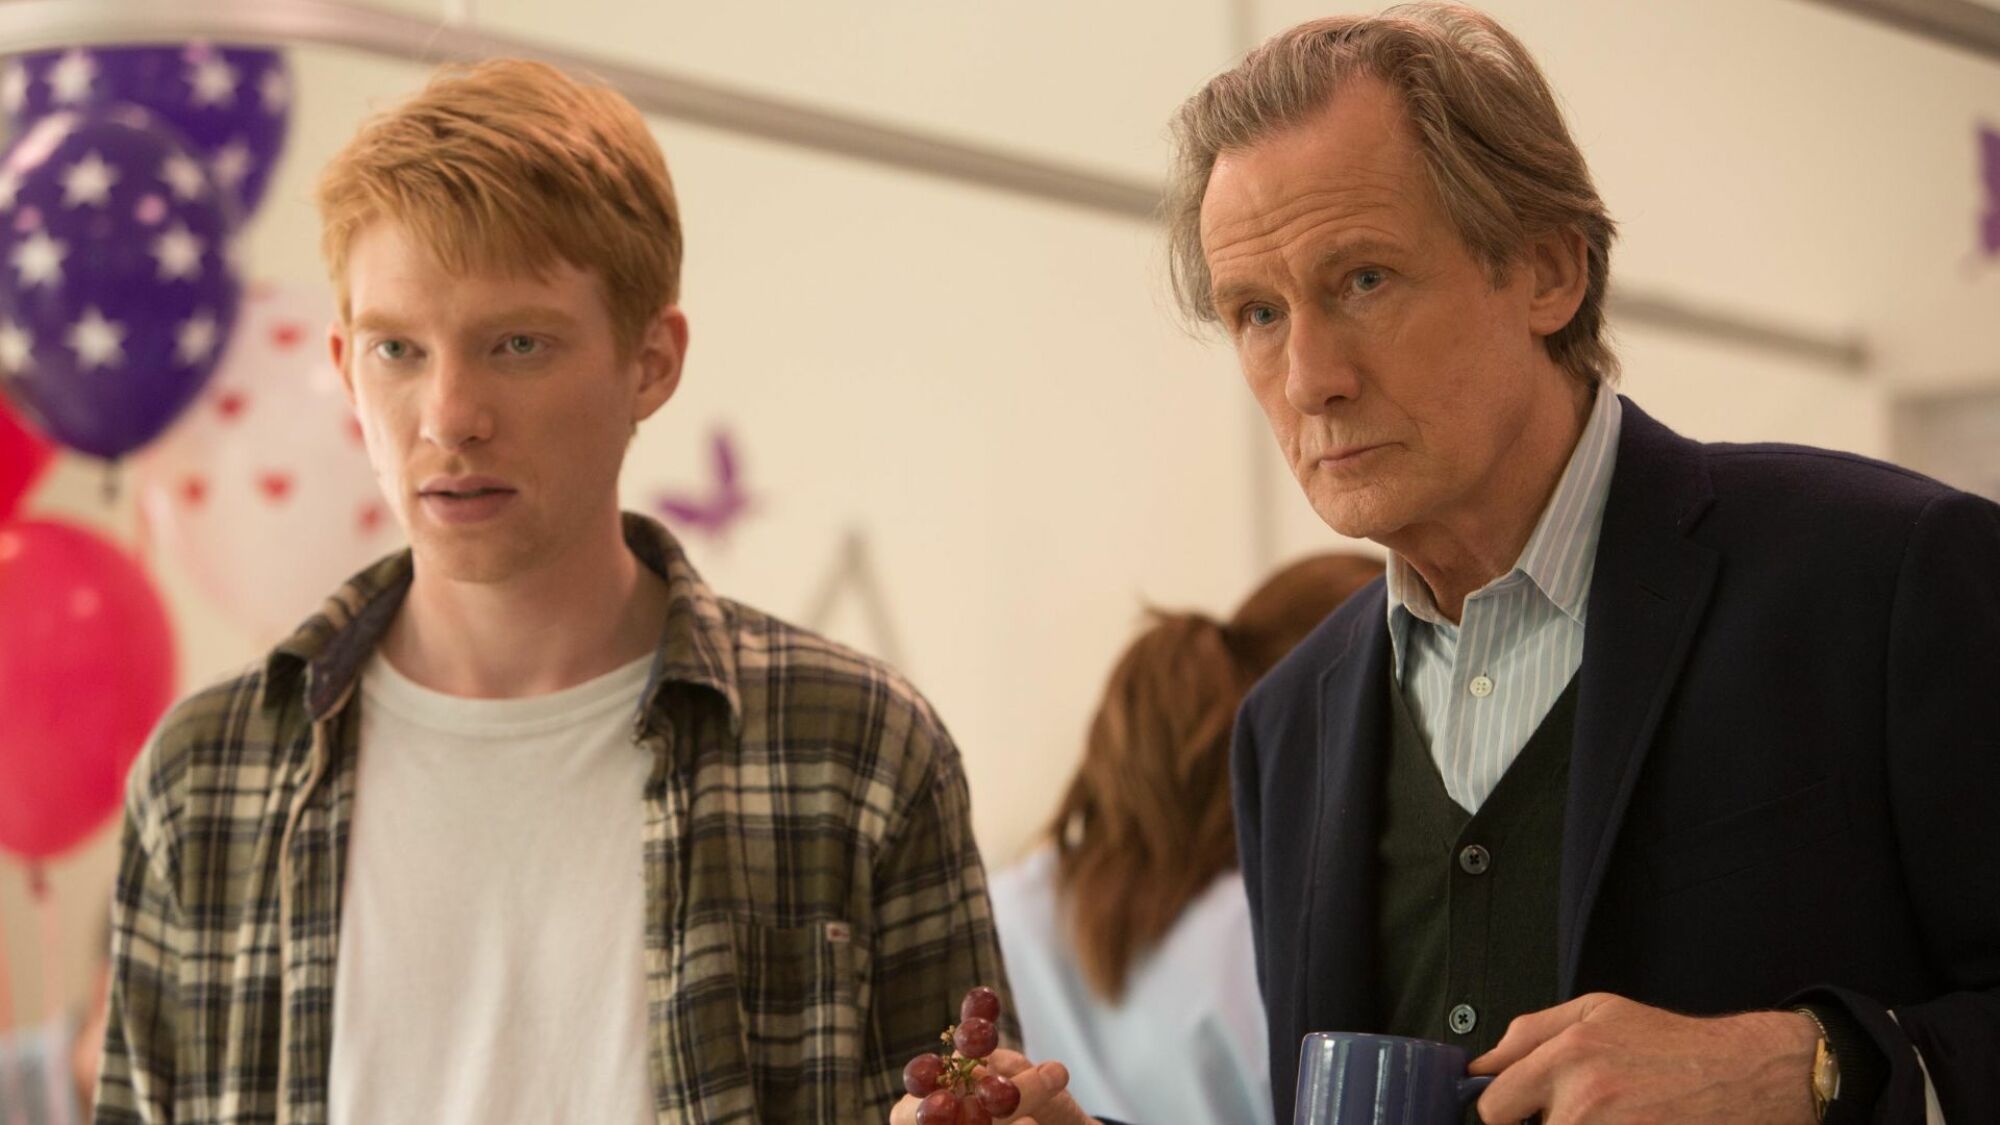 Domhnall Gleeson and Bill Nighy play father and son in "About Time."